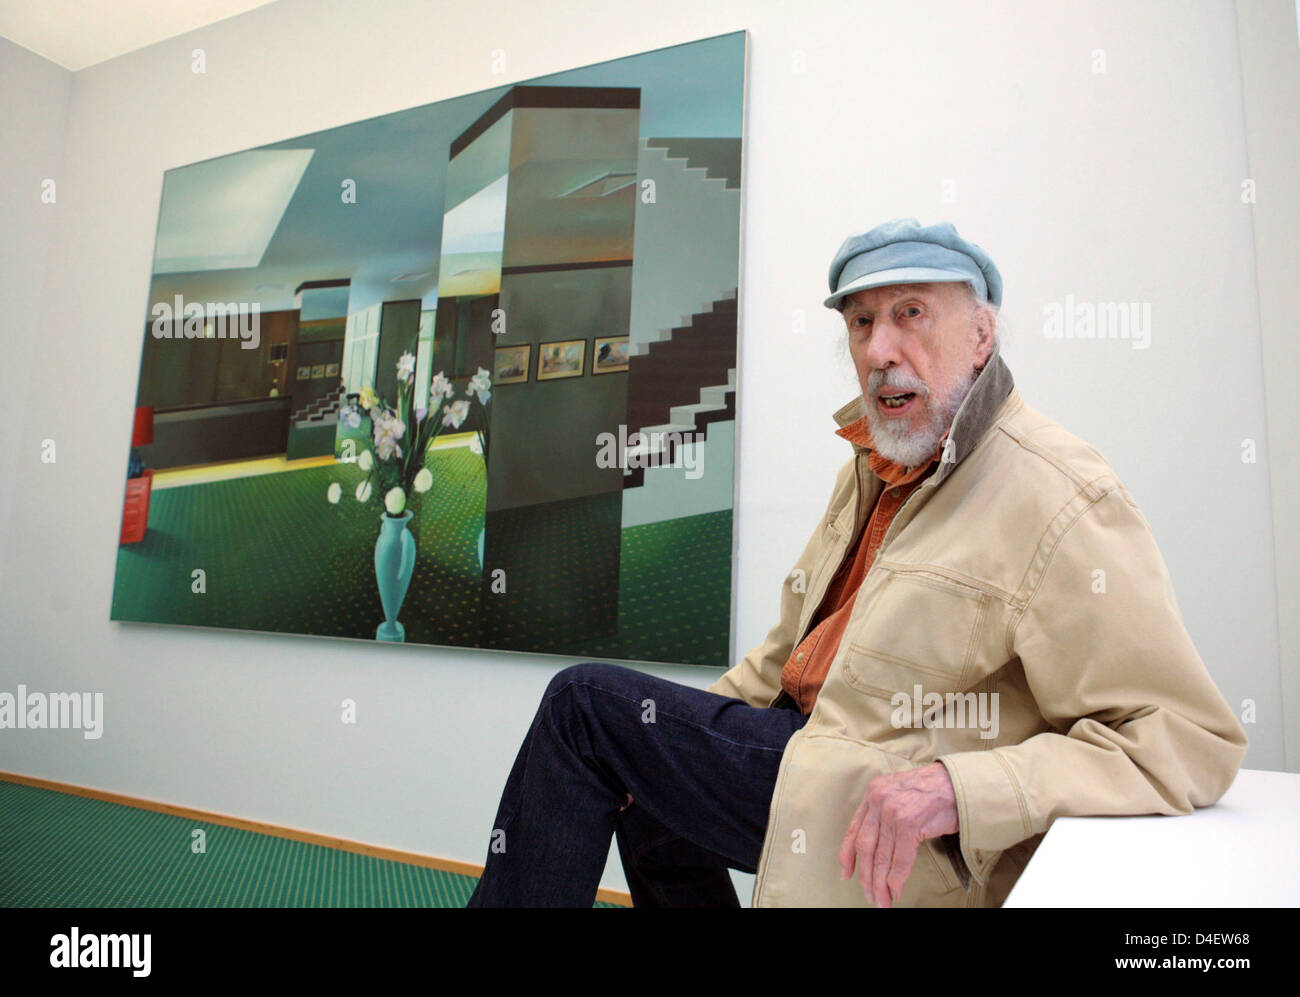 British painter and graphic artist Richard Hamilton is pictured in his exhibition 'virtuelle Raeume' ('virtual rooms') in the Kunsthalle in Bielefeld, Germany, 21 May 2008. The exhibition runs from 25 May through 10 August 2008. Photo: OLIVER KRATO Stock Photo